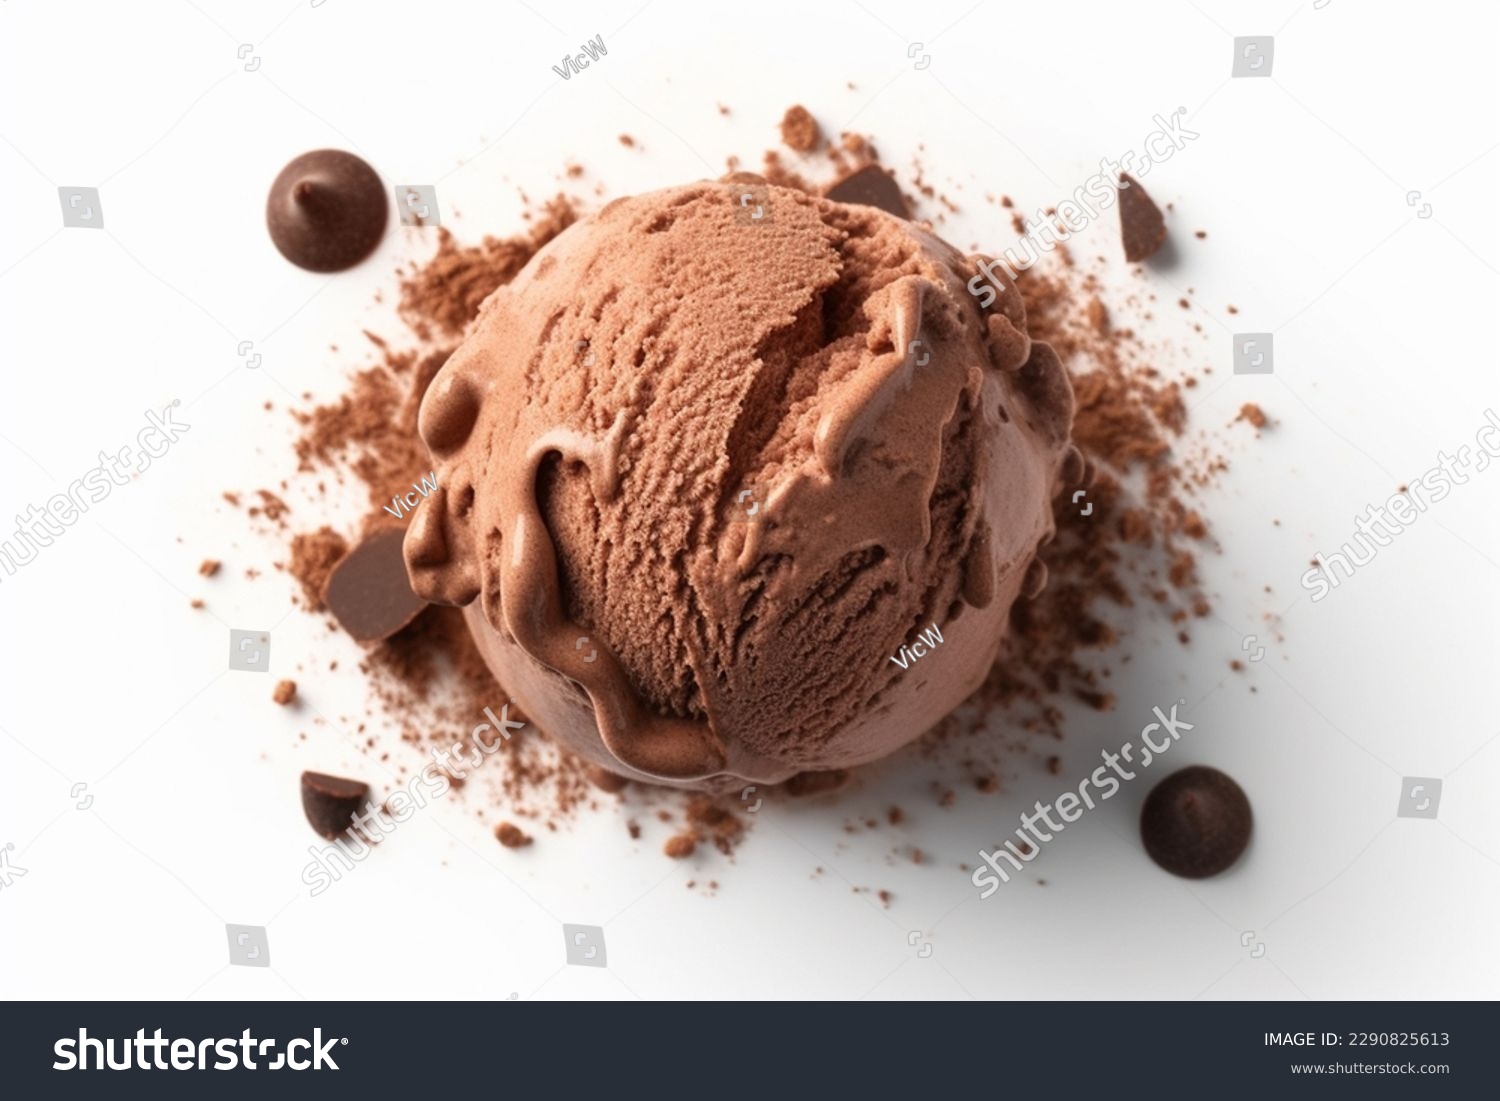 Ice cream scoop isolated on white background, top view image. Tasty chocolate desserts concept, closeup studio shot. Summer desserts, chocolate pralines. #2290825613